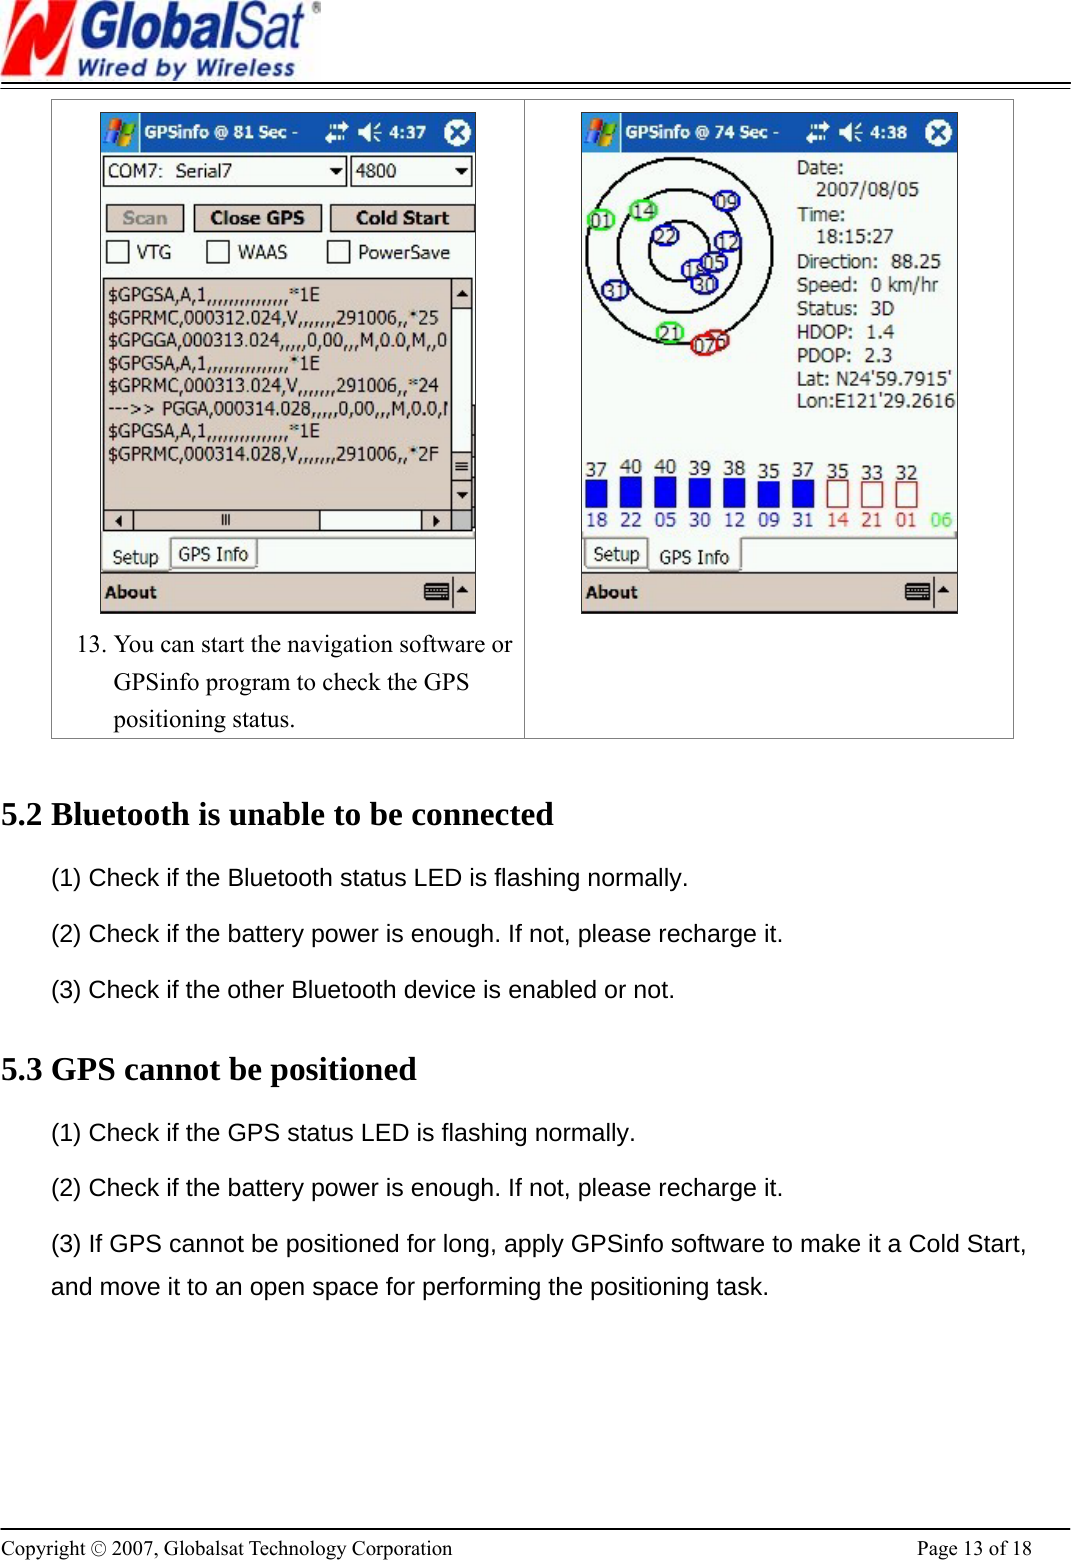                                                                      Copyright © 2007, Globalsat Technology Corporation  Page 13 of 18  13. You can start the navigation software or GPSinfo program to check the GPS positioning status.    5.2 Bluetooth is unable to be connected (1) Check if the Bluetooth status LED is flashing normally.   (2) Check if the battery power is enough. If not, please recharge it. (3) Check if the other Bluetooth device is enabled or not. 5.3 GPS cannot be positioned (1) Check if the GPS status LED is flashing normally.   (2) Check if the battery power is enough. If not, please recharge it. (3) If GPS cannot be positioned for long, apply GPSinfo software to make it a Cold Start, and move it to an open space for performing the positioning task.   